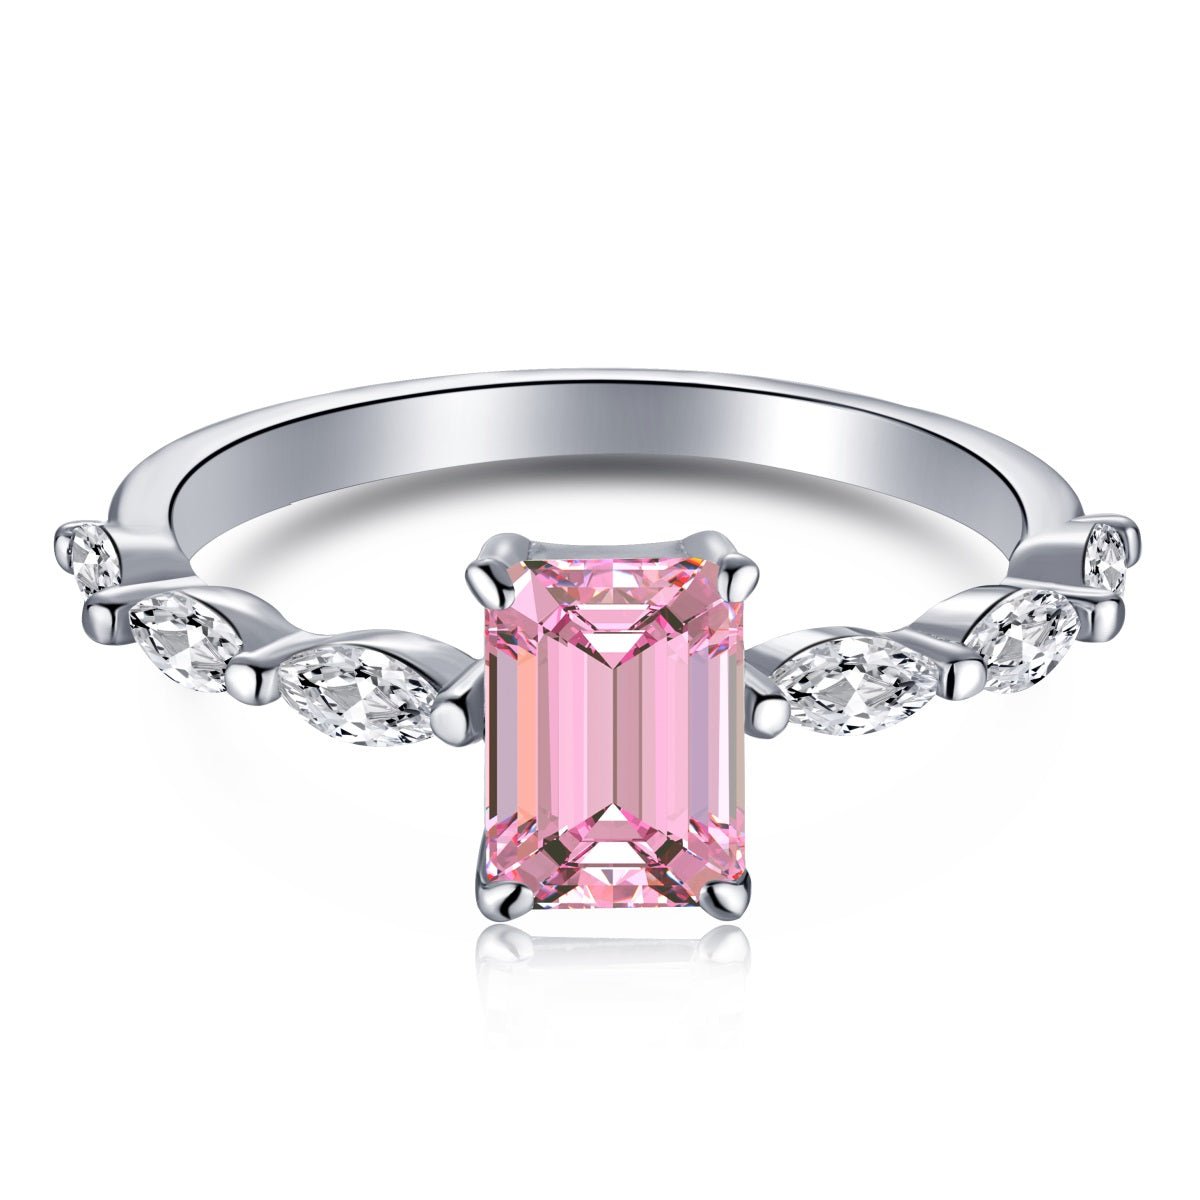 Women's Silver Ring with 5A Pink Zircon Stone - Jewelry - EM Accessories - 925 silver - new - SILVER-0037-6-RING